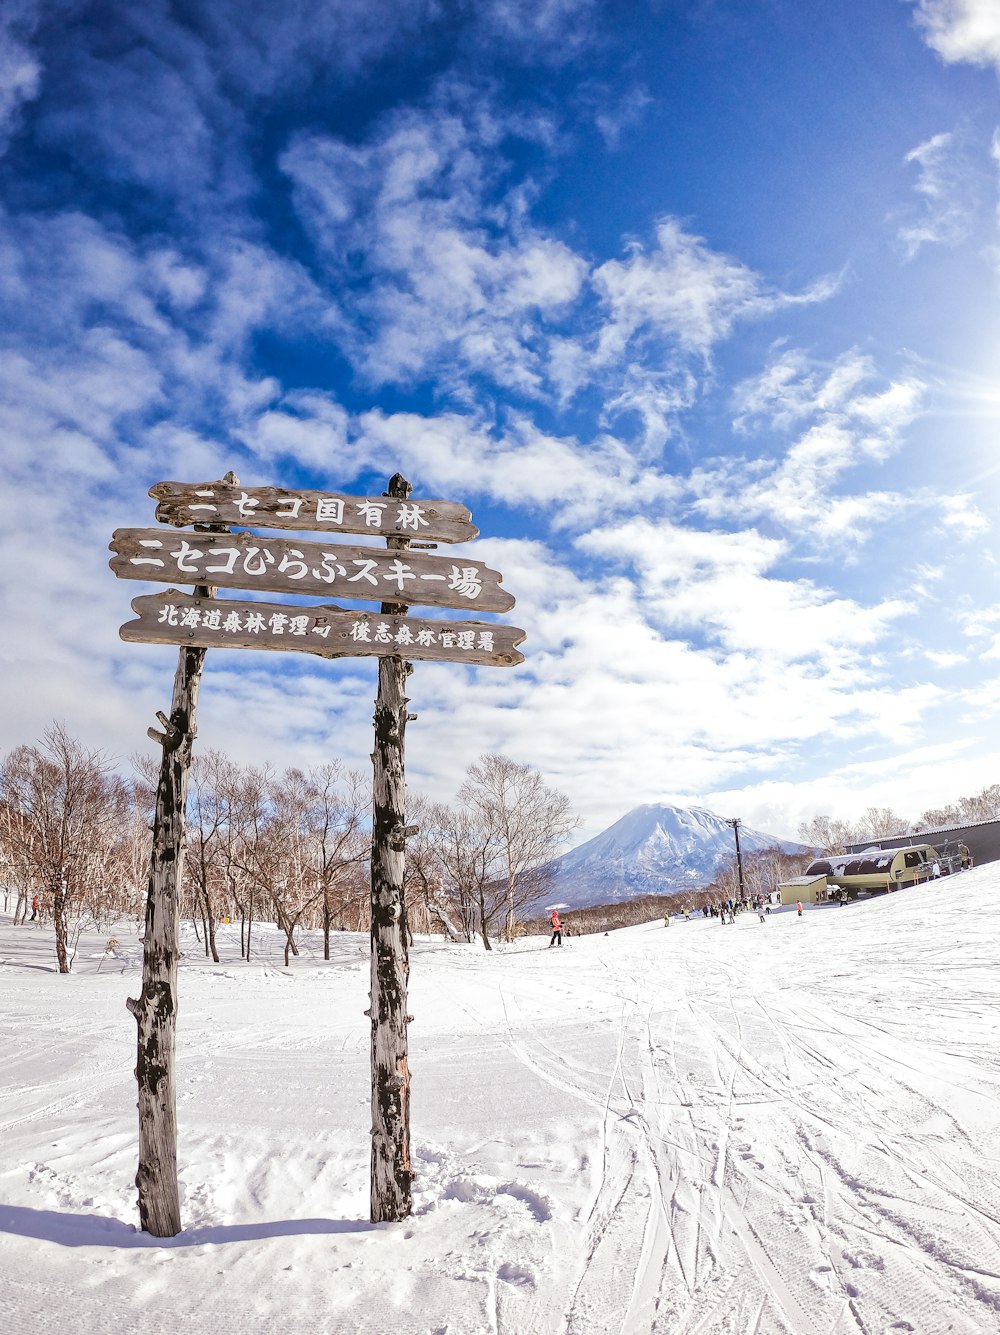 brown wooden bench on snow covered ground under blue and white cloudy sky during daytime